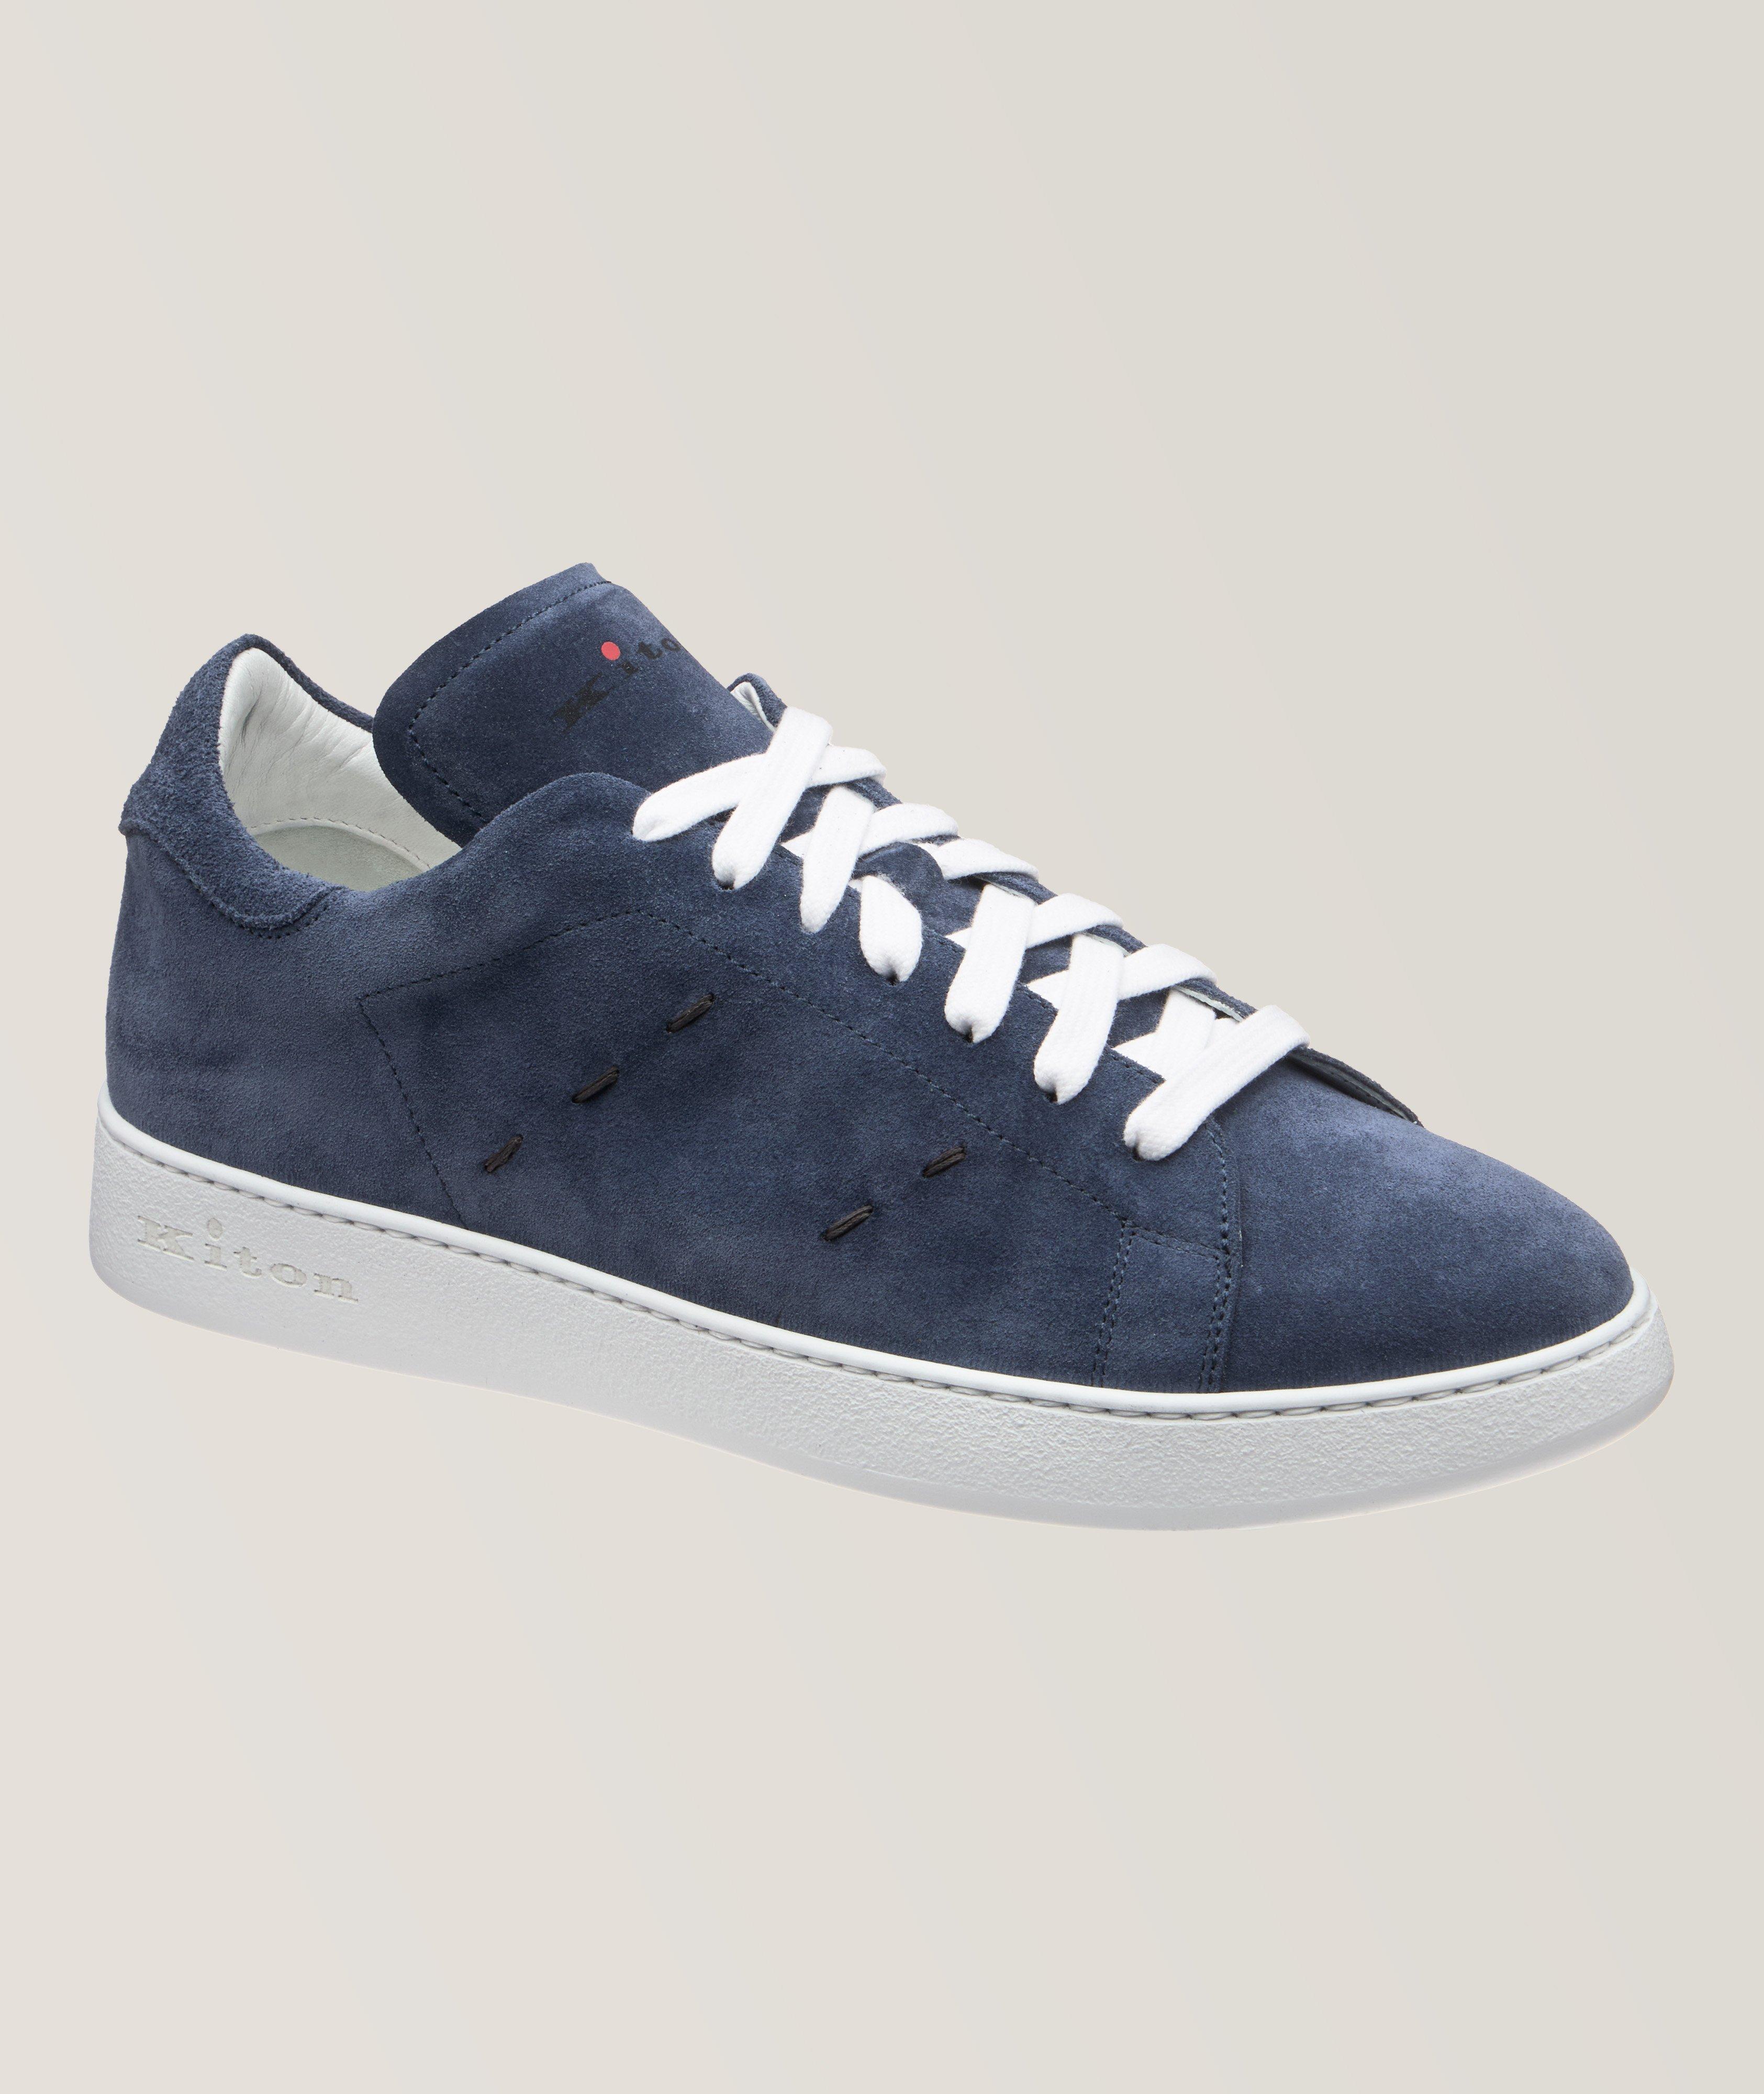 Suede Pick Stitch Sneakers